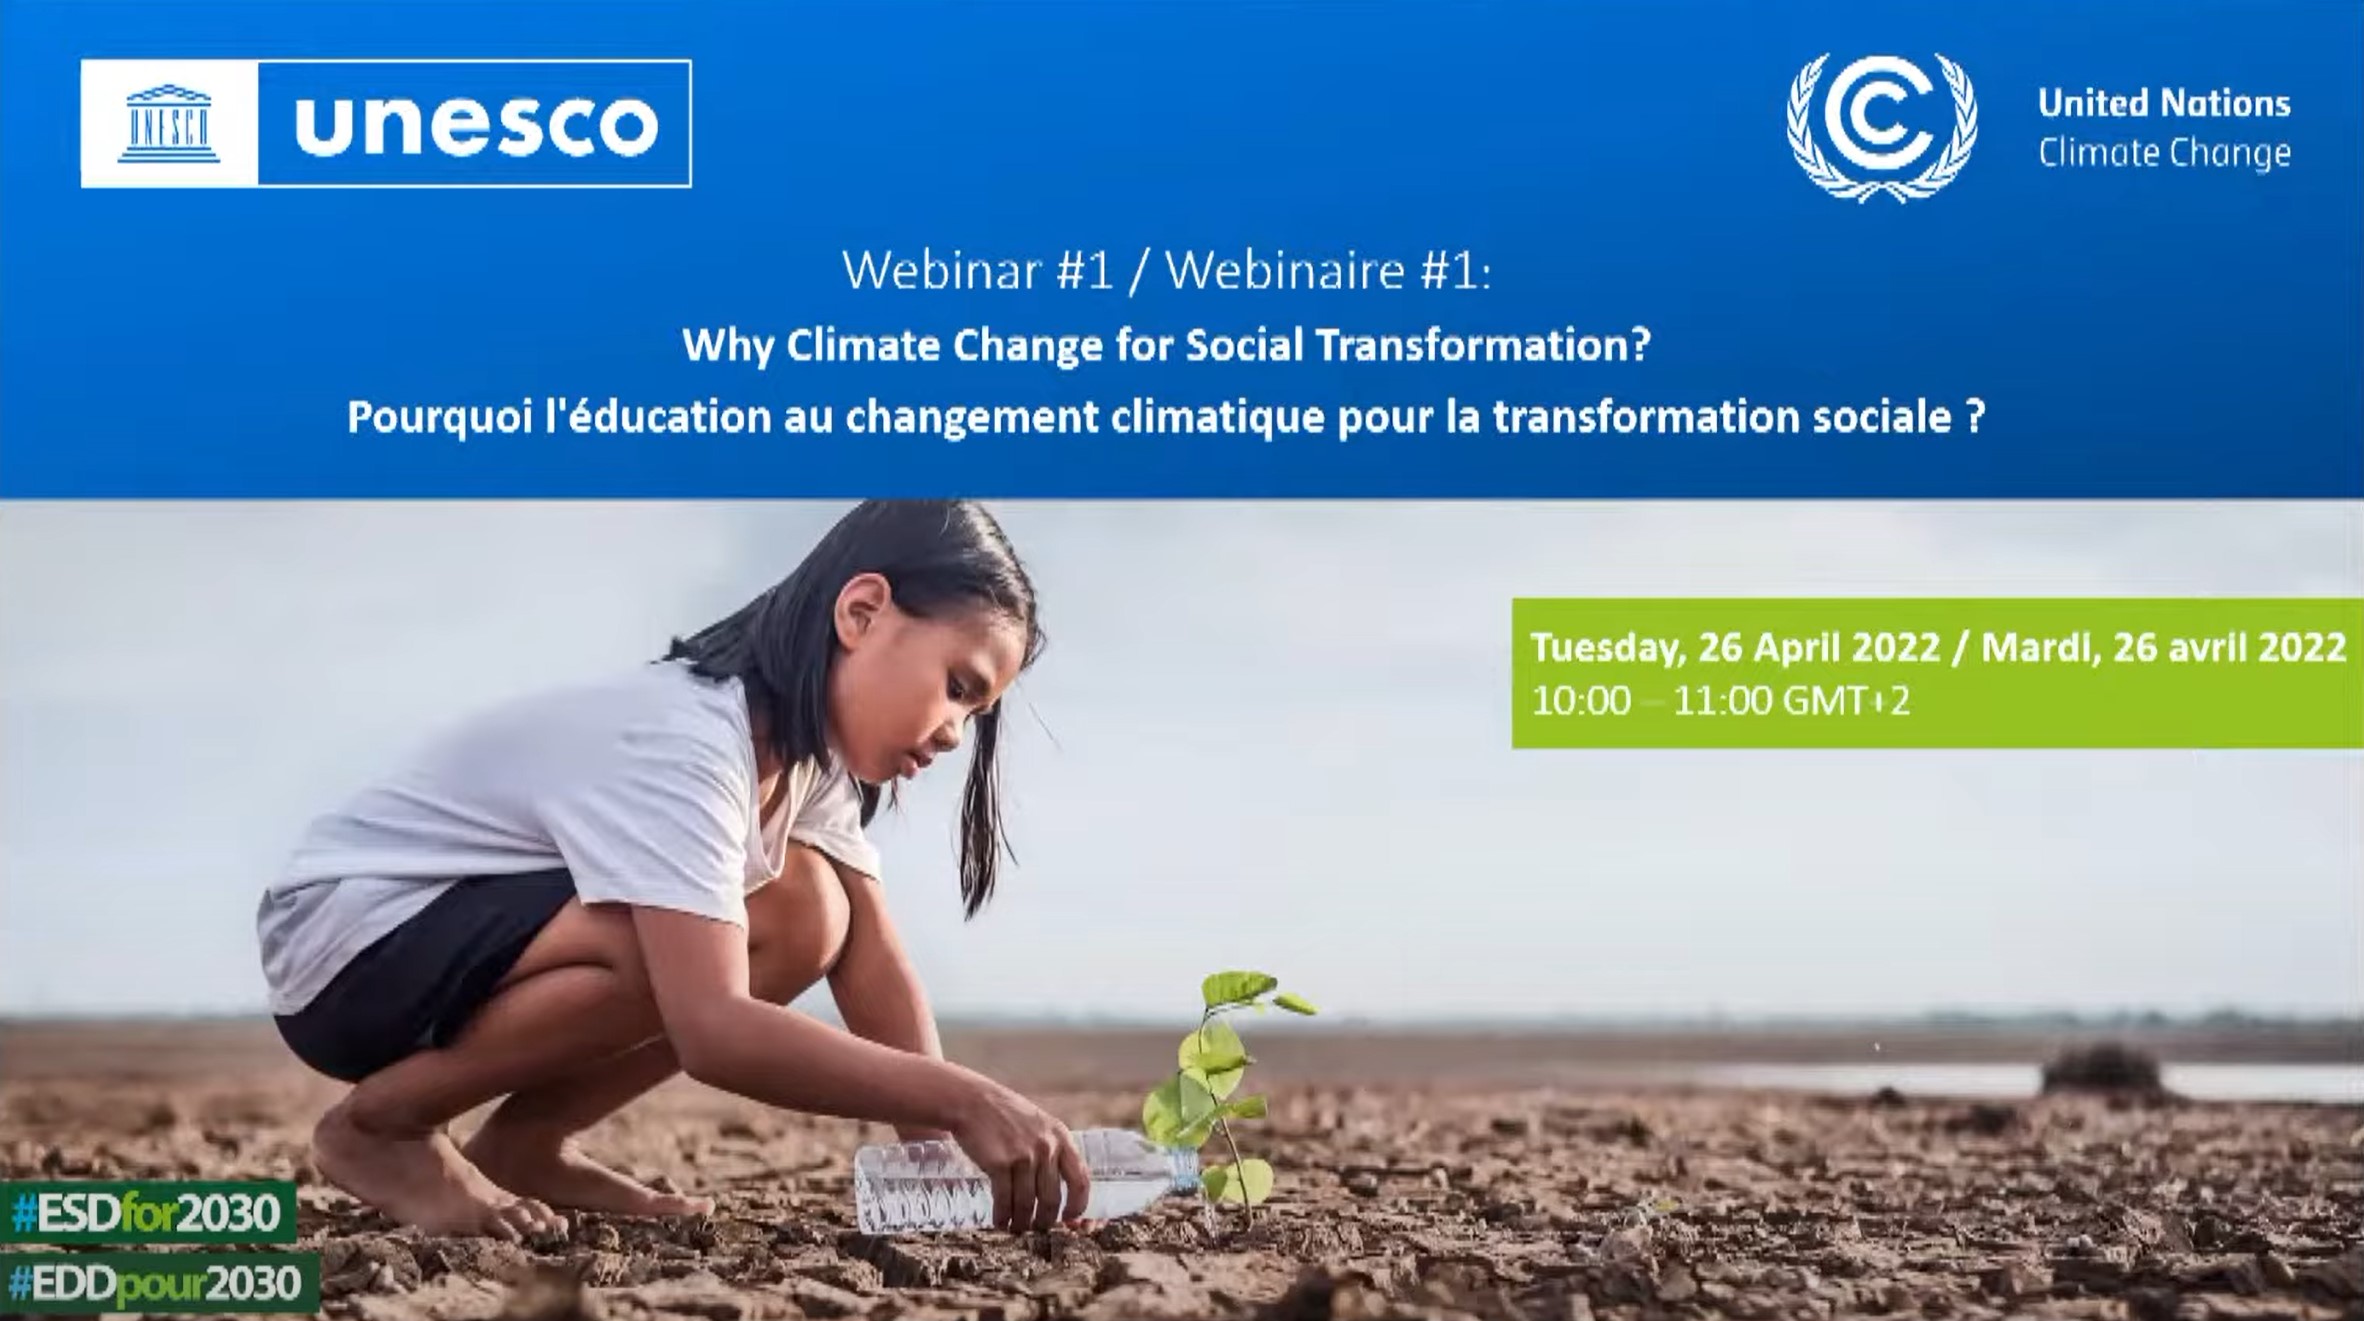 UNESCO Webinar #1 – Why Climate Change for Social Transformation